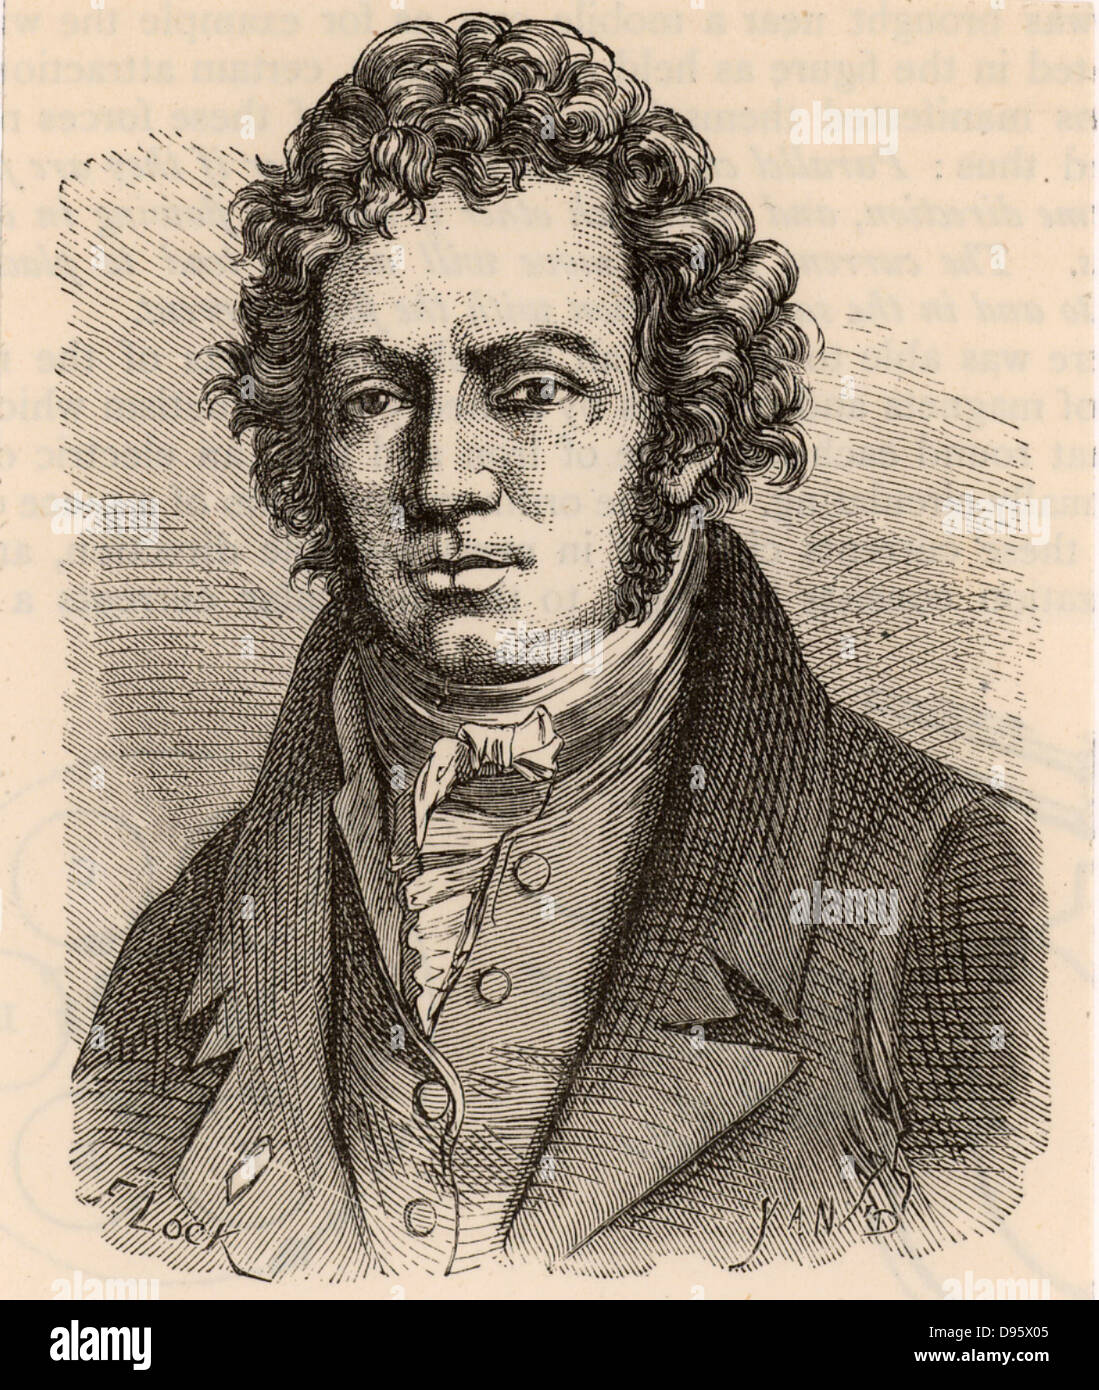 Andre-Marie Ampere (1775-1836) French mathematician and physicist who established the relationship of electricity and magnetism. Engraving from 'Les Merveilles de la Science' by Louis Figuier (Paris, c1870). Stock Photo